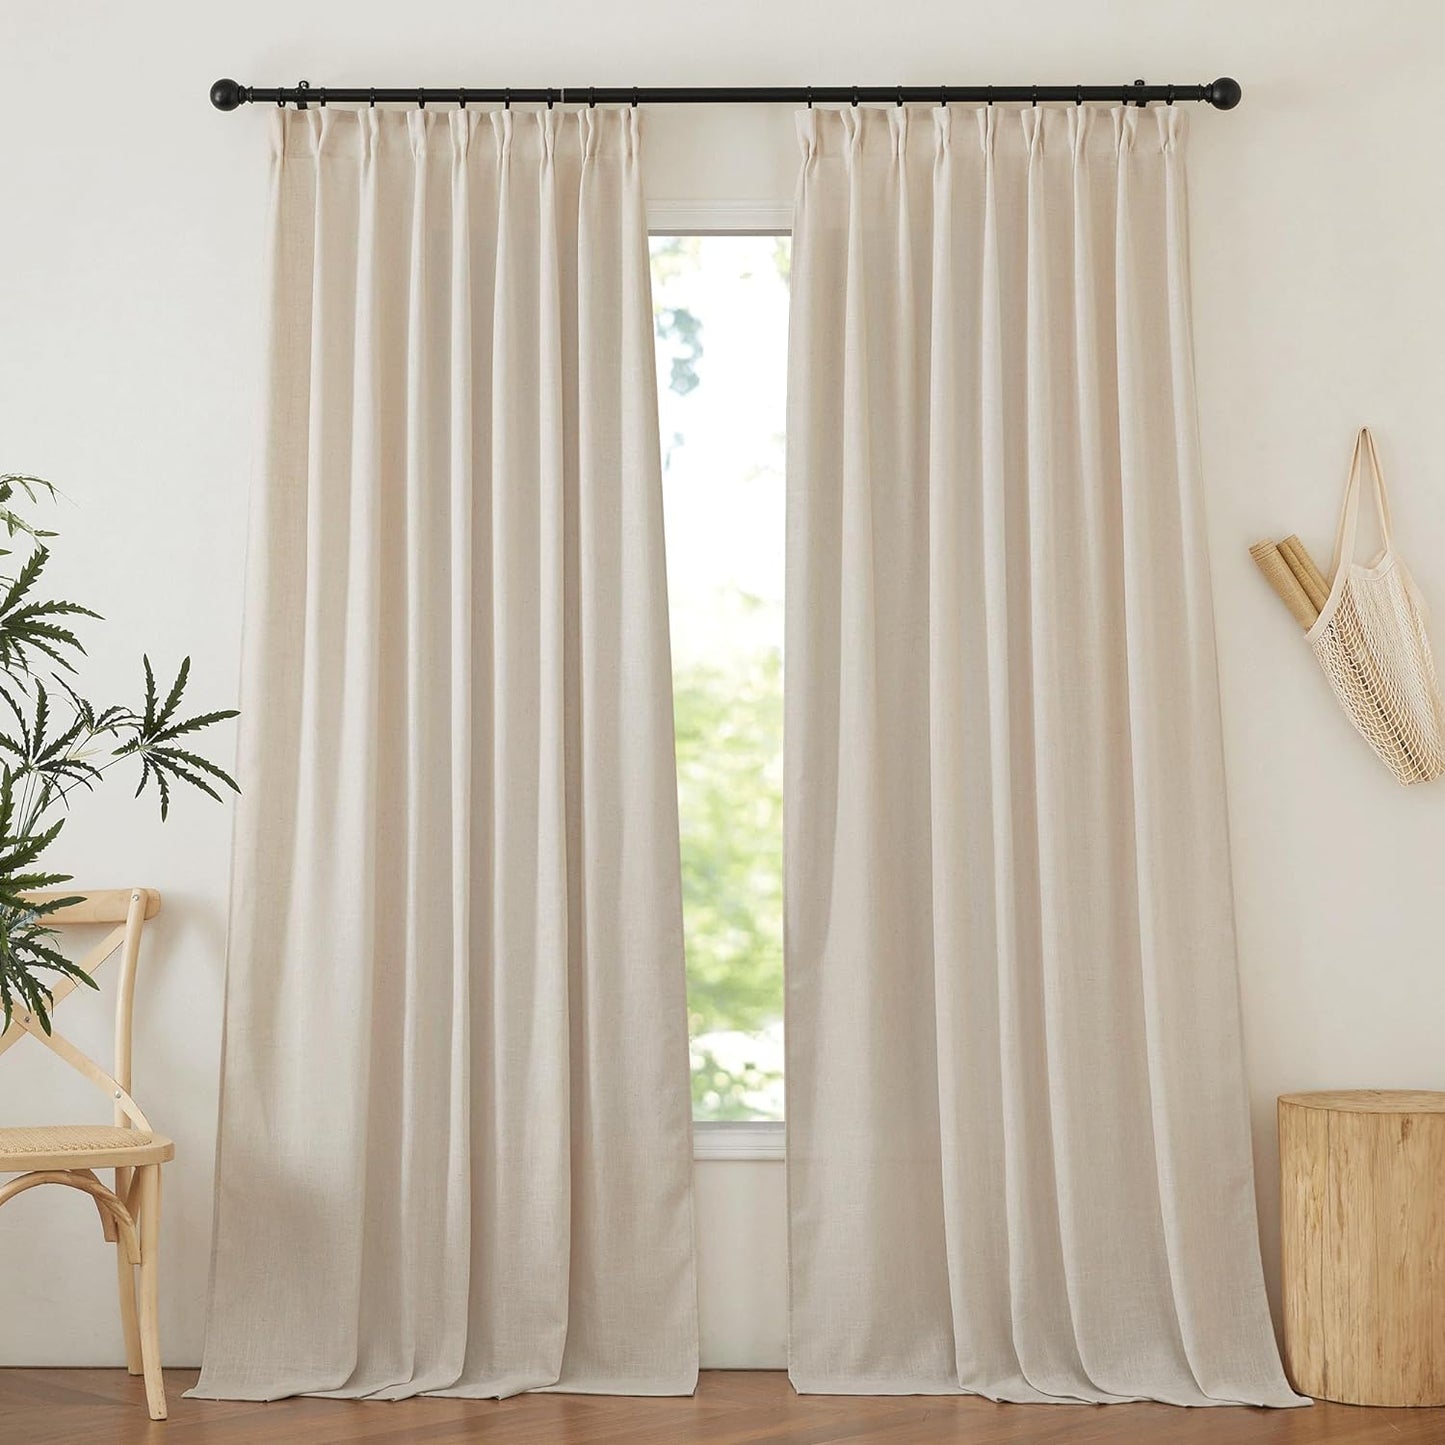 NICETOWN White Curtains Sheer - Semi Sheer Window Covering, Light & Airy Privacy Rod Pocket Back Tab Pinche Pleated Drapes for Bedroom Living Room Patio Glass Door, 52 X 63 Inches Long, Set of 2  NICETOWN Cream W52 X L84 